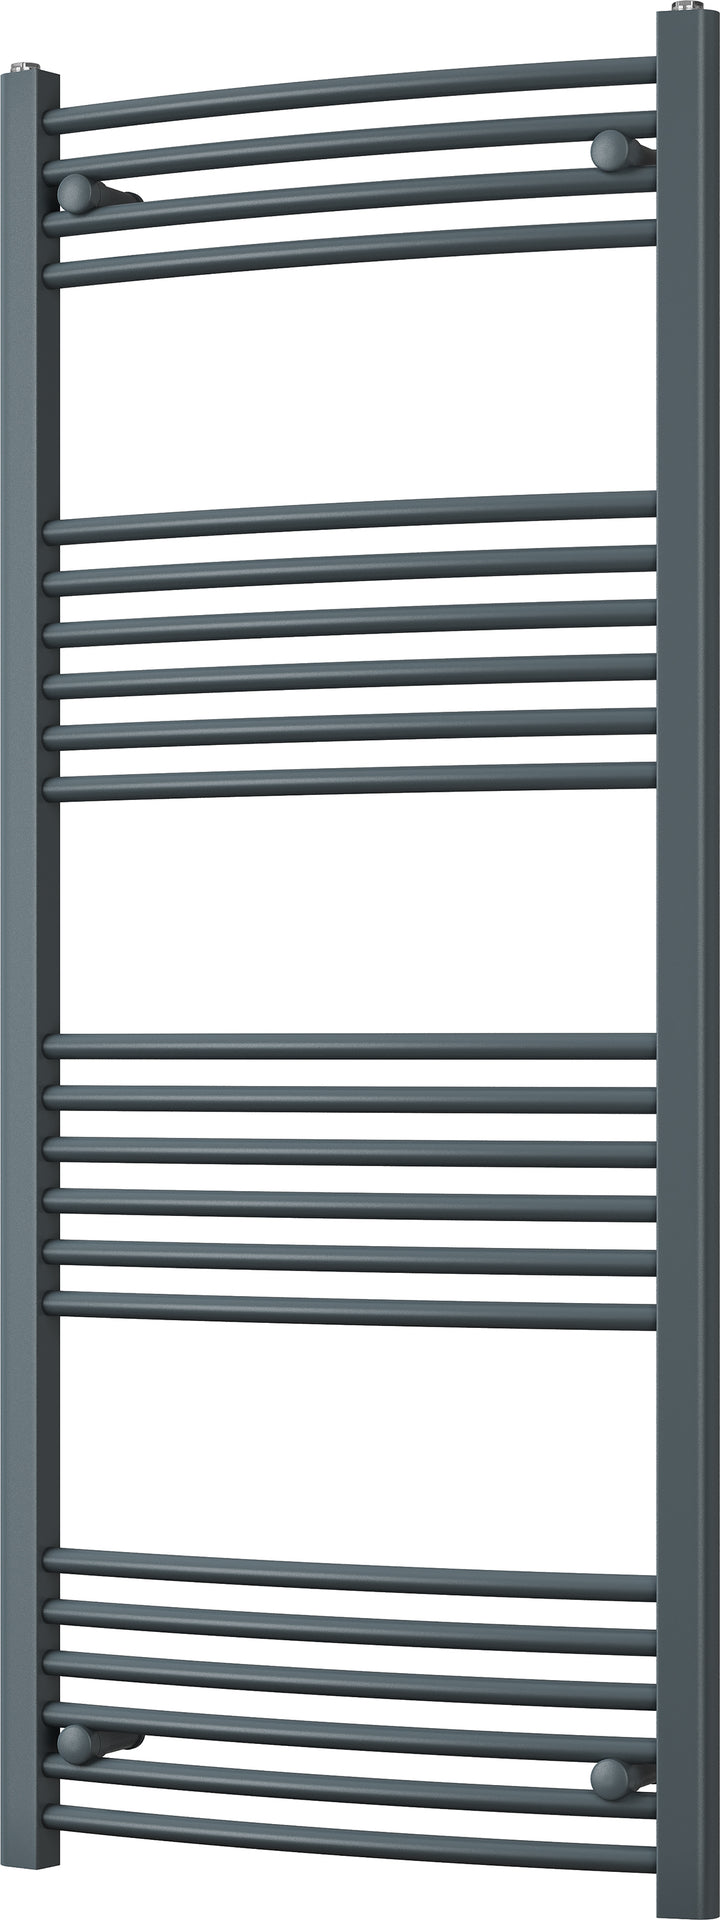 Zennor - Anthracite Heated Towel Rail - H1400mm x W600mm - Curved